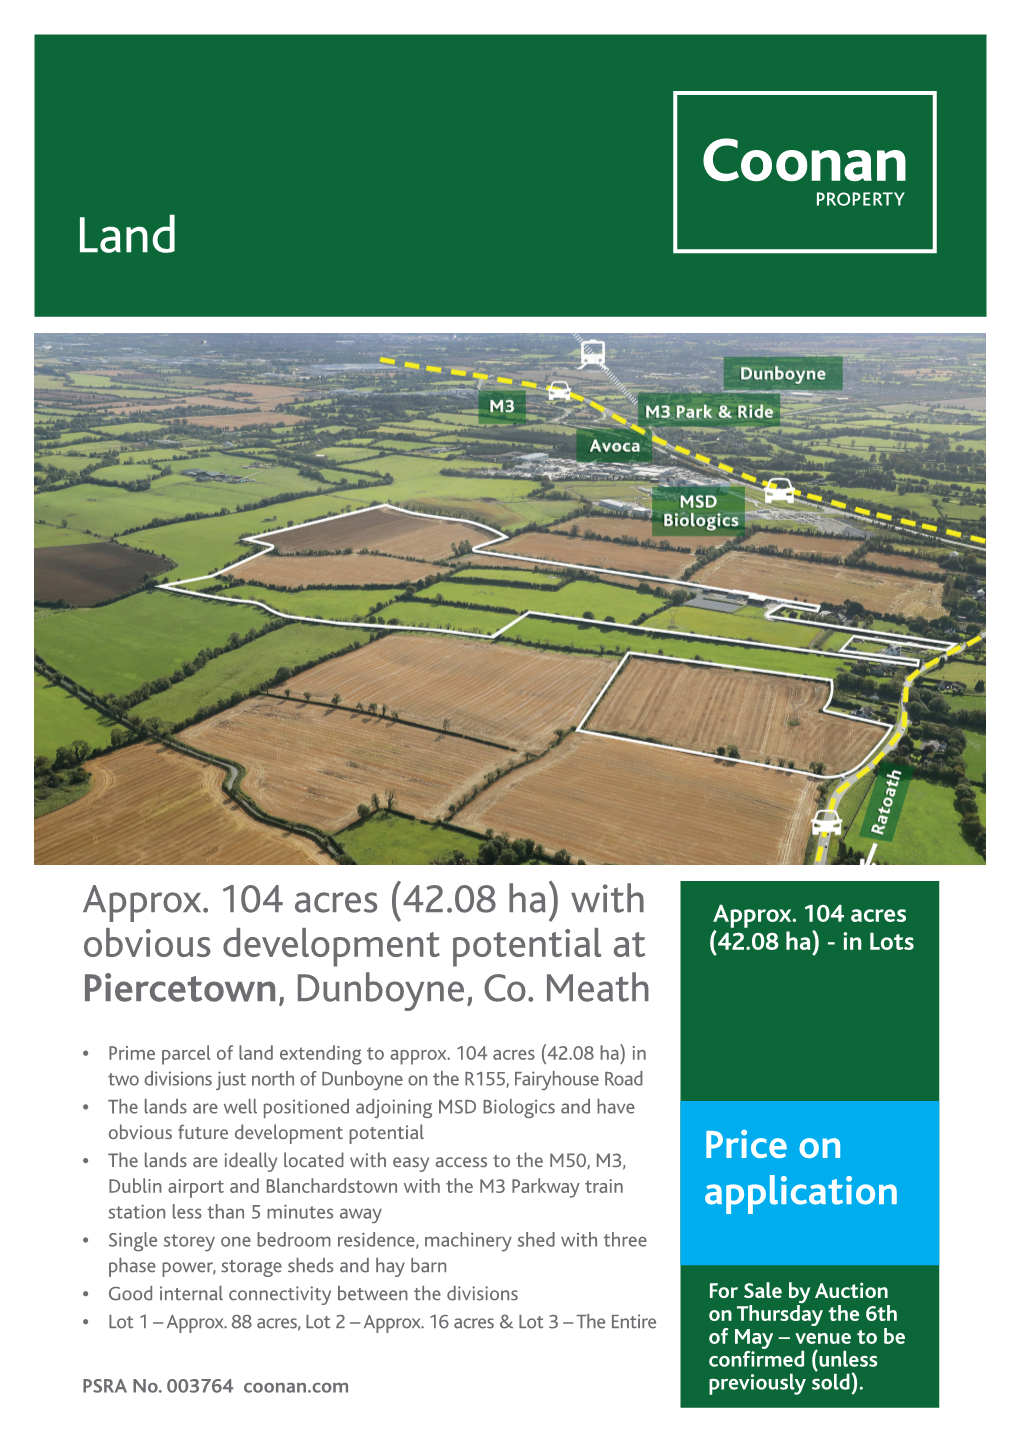 Approx. 104 Acres (42.08 Ha) with Obvious Development Potential At